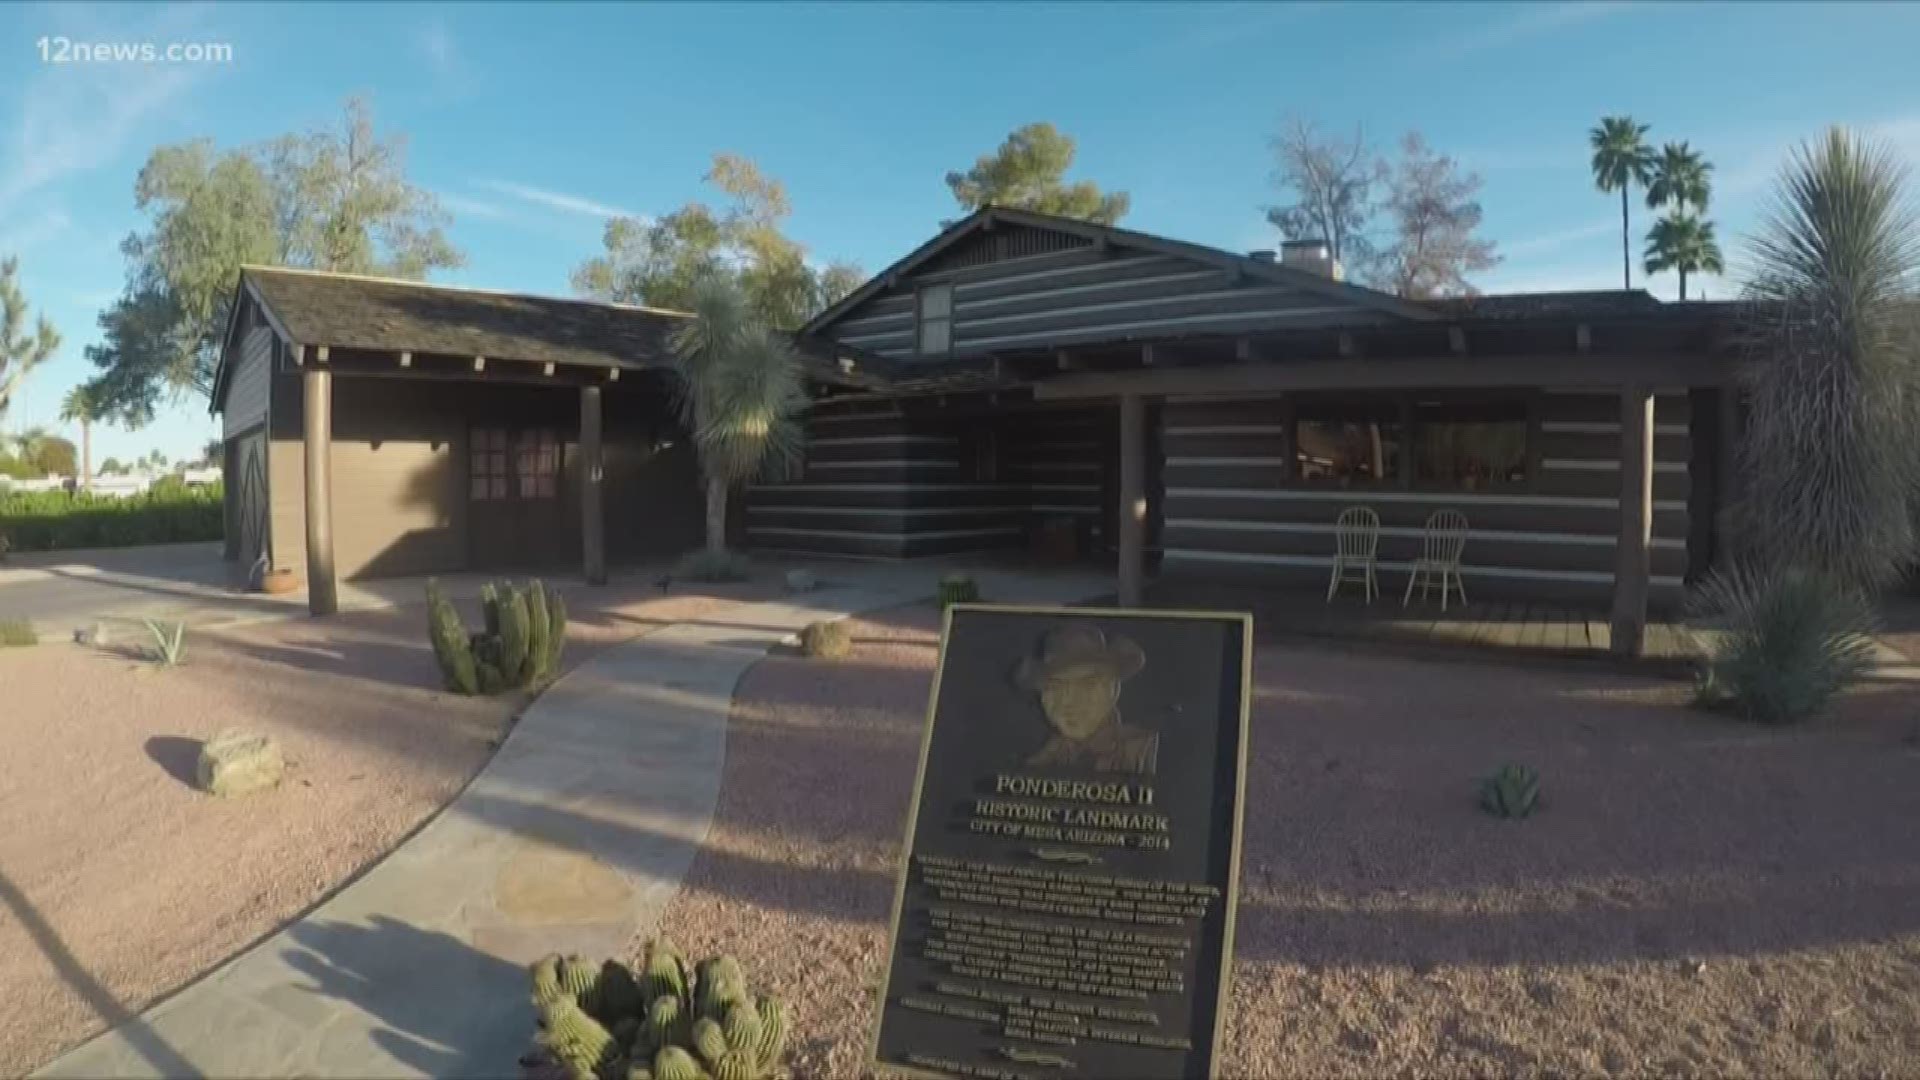 The Ponderosa II in Mesa is an exact replica of the house in "Bonanza". Built in 1963, you can take a tour of the home, but just know it serves as an actual home to Tom and Louise Swann.